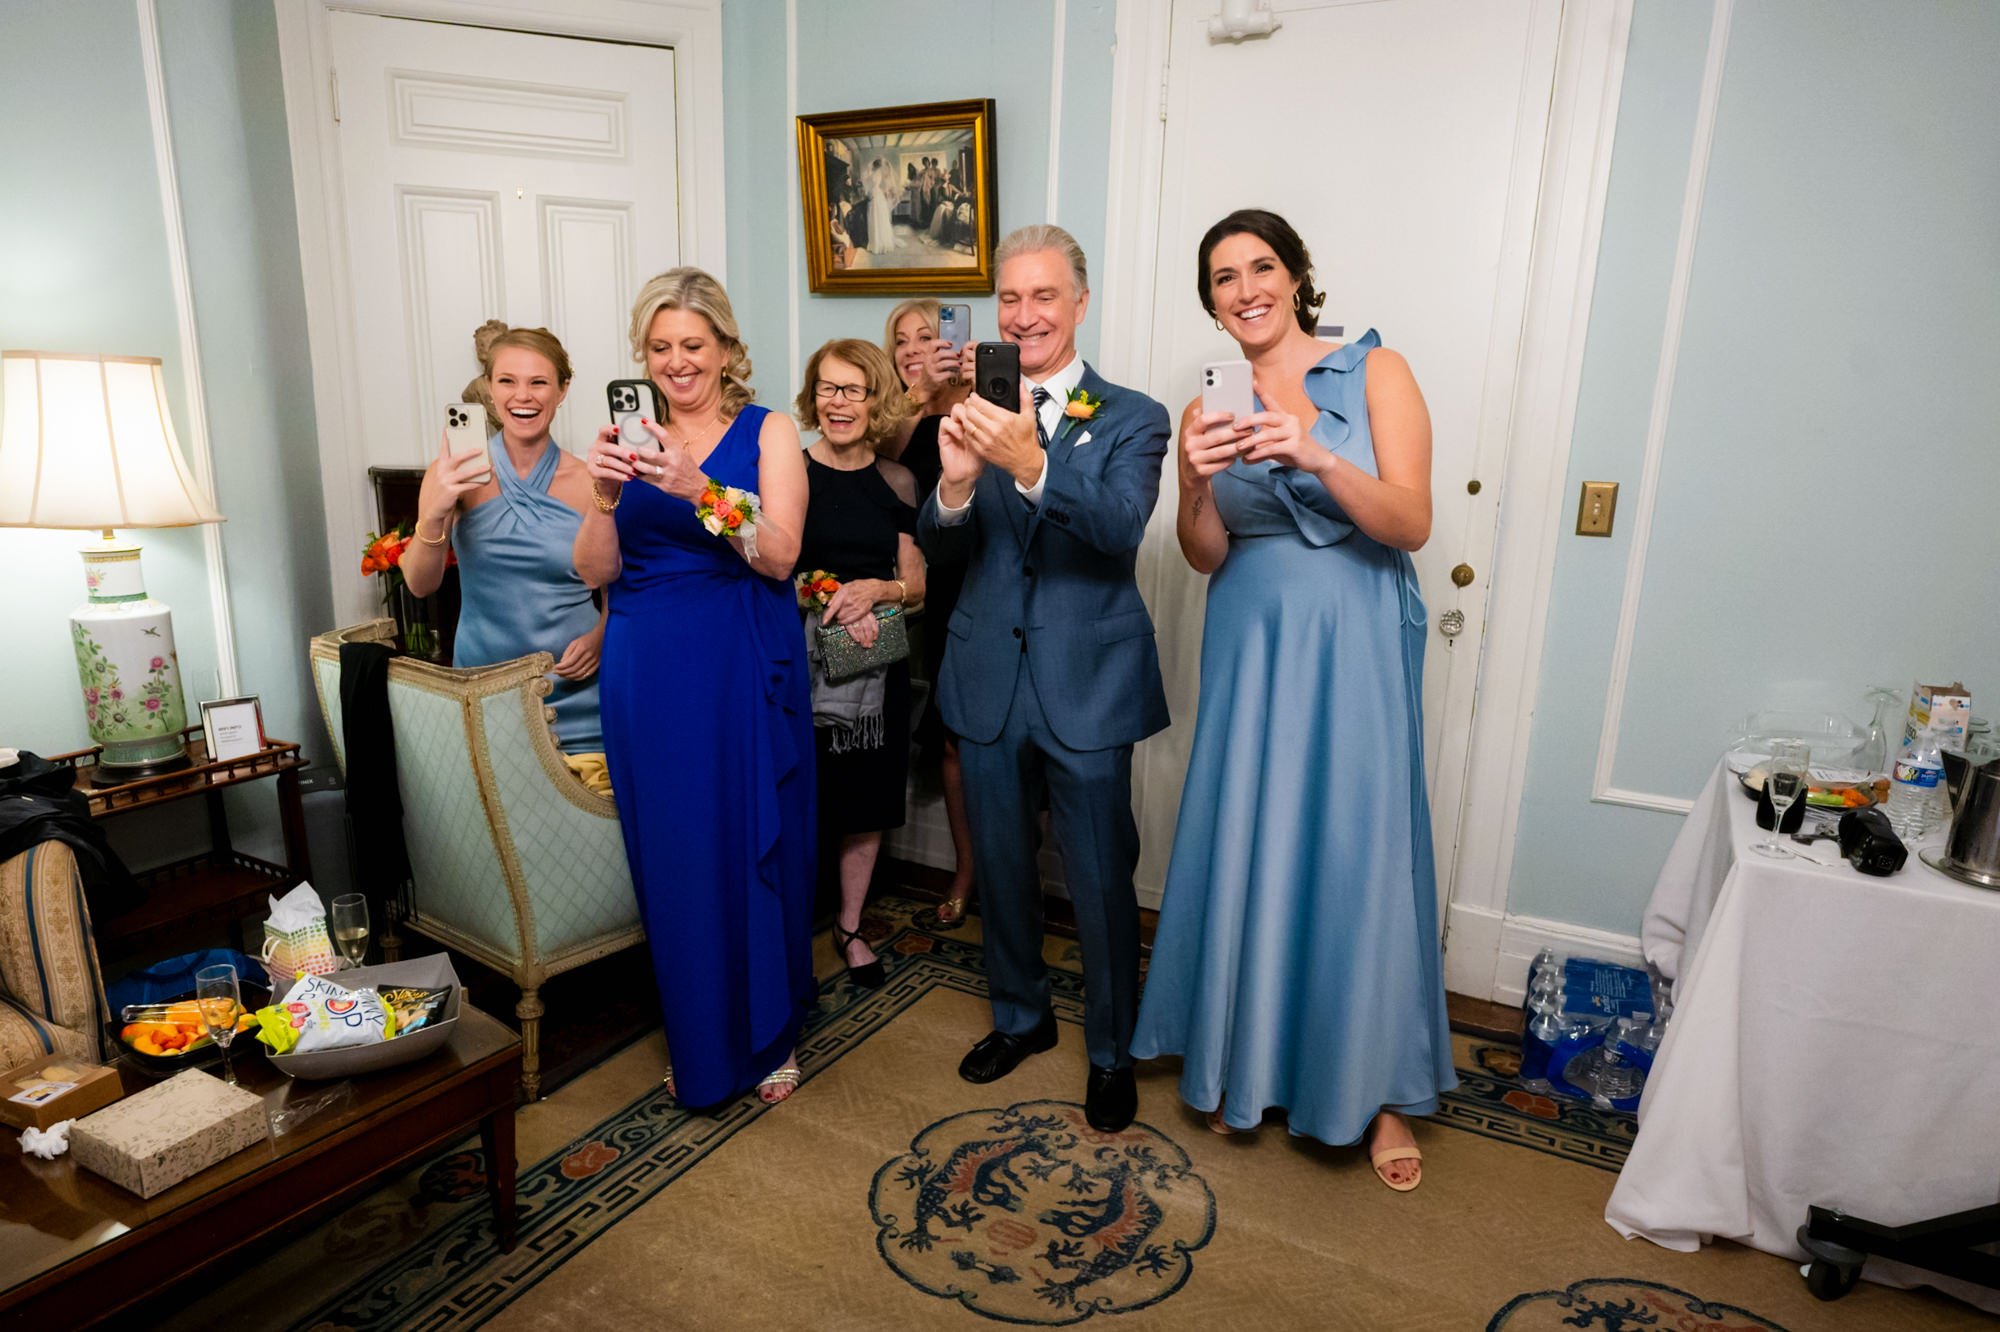 The Whittemore House wedding